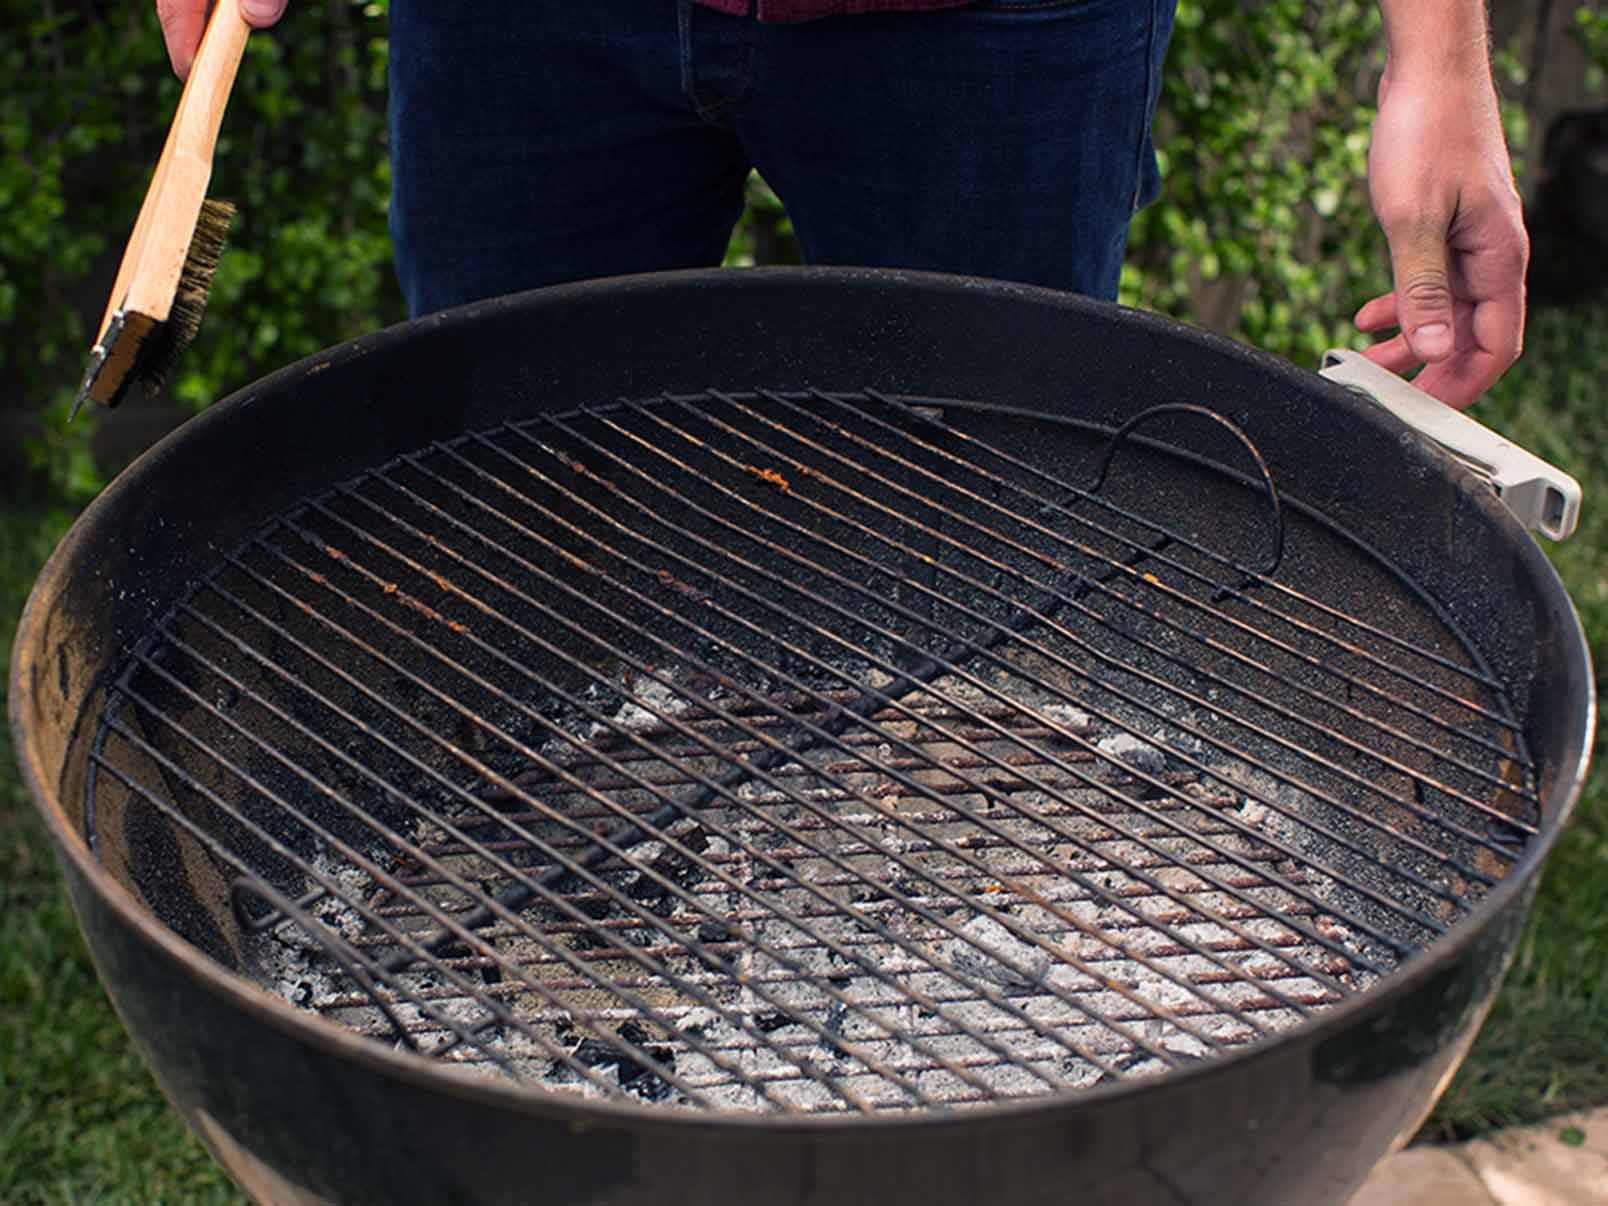 https://www.kingsford.com/wp-content/uploads/2023/04/How-to-Prep-Grill-2-1608.jpg?quality=50